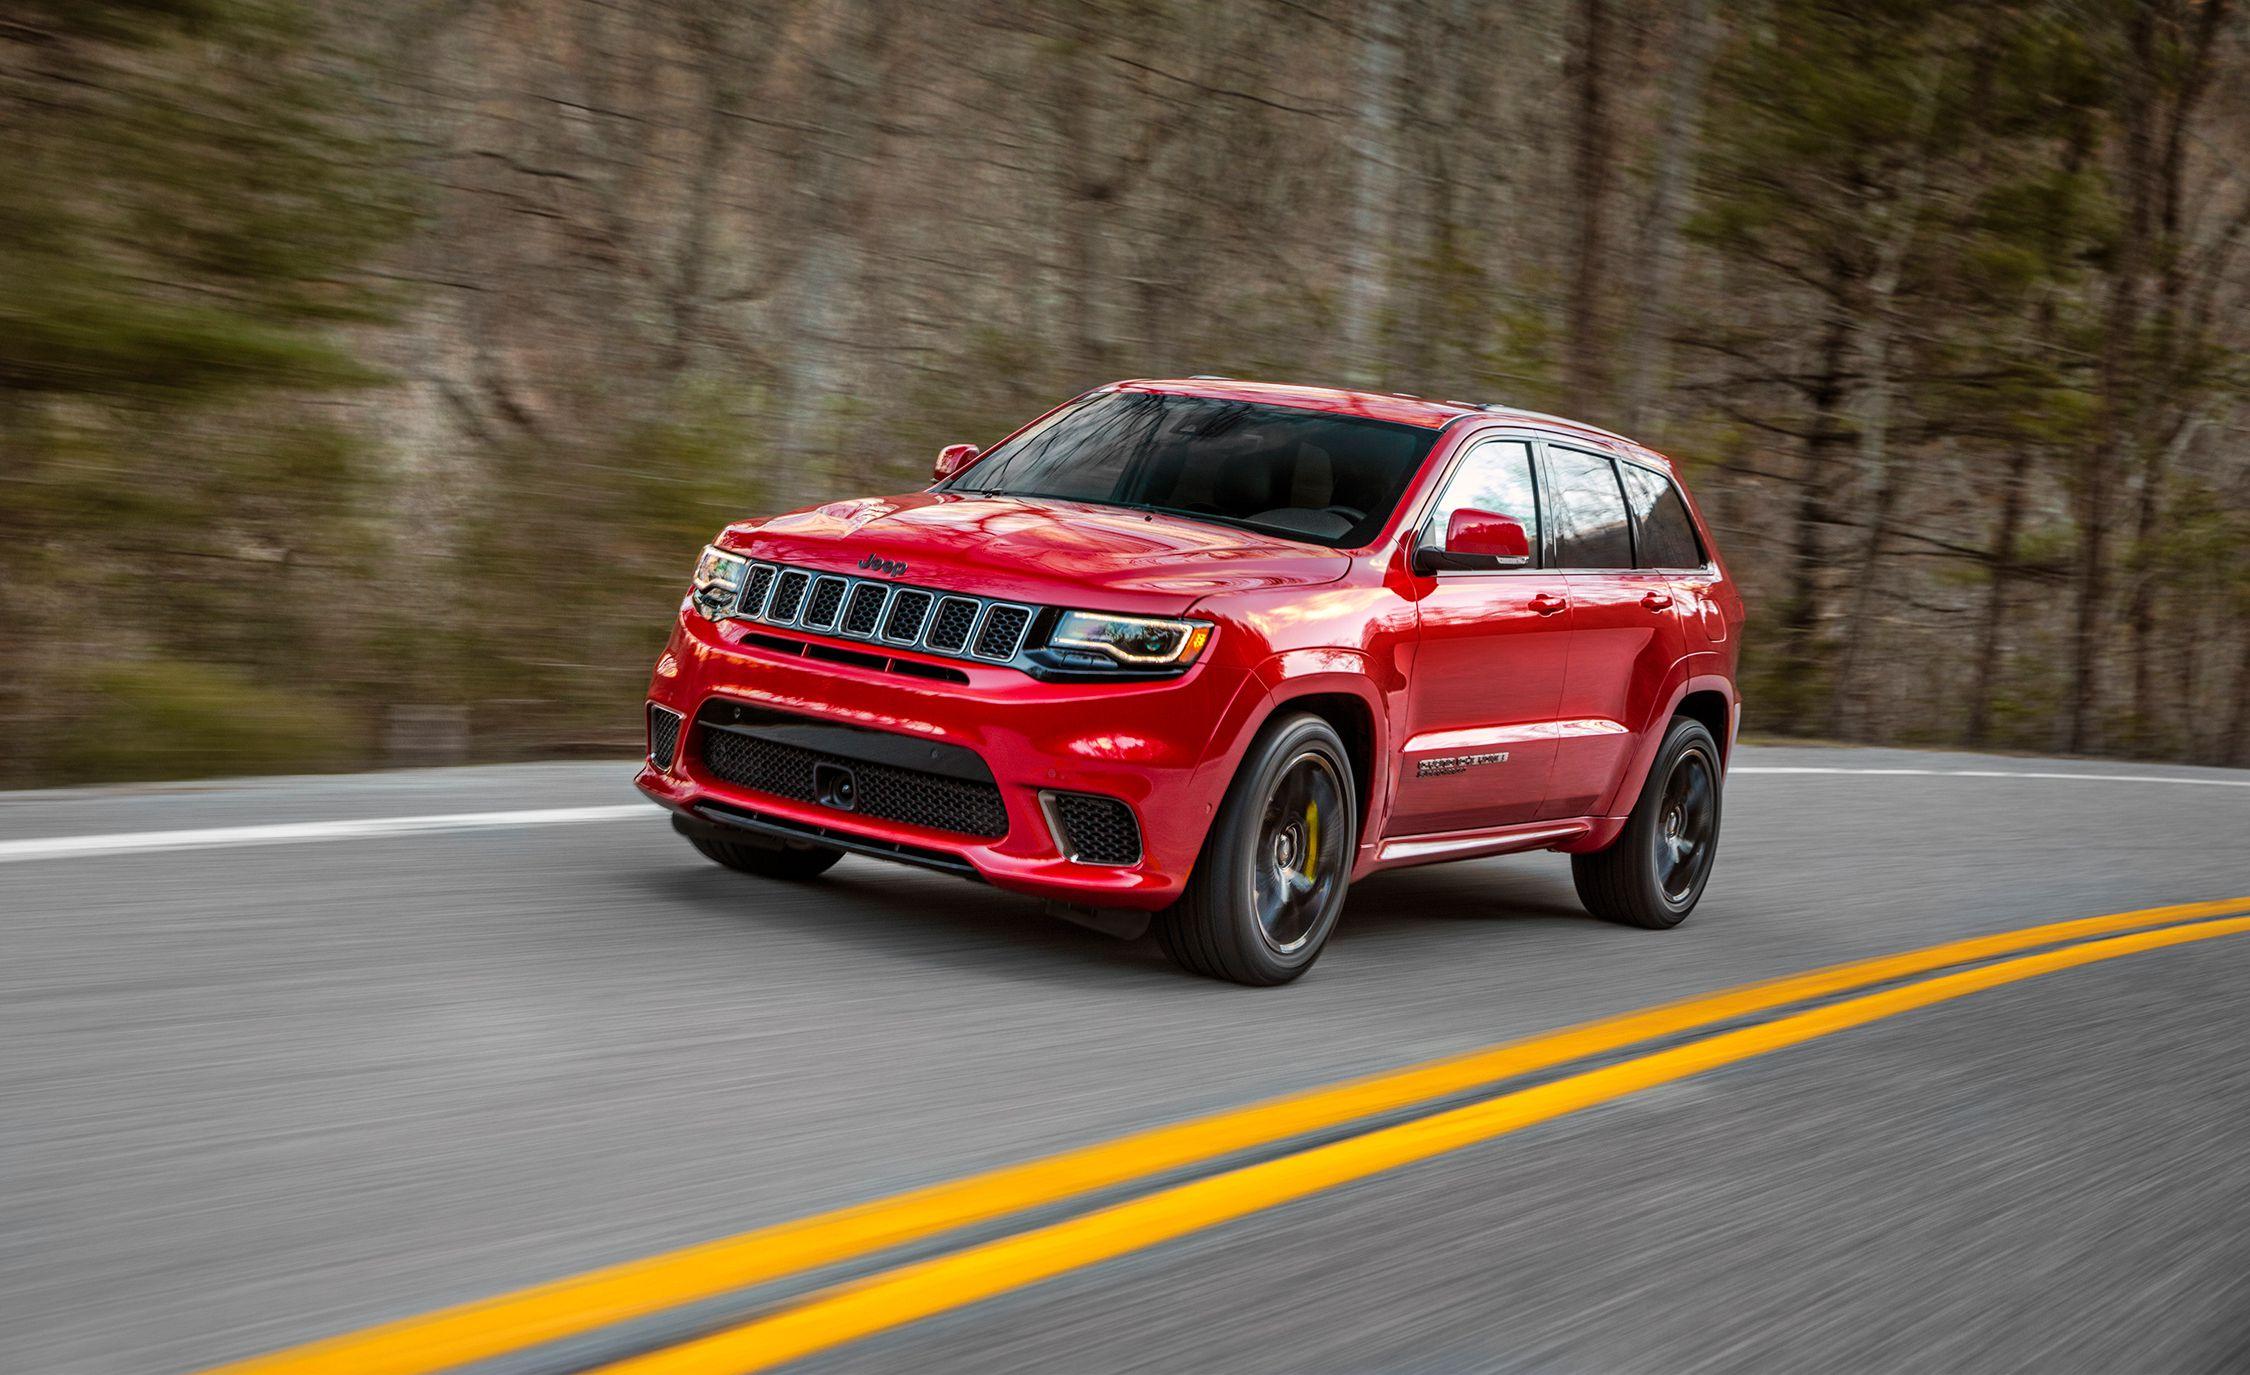 Jeep Grand Cherokee Trackhawk Official Photo and Info. News